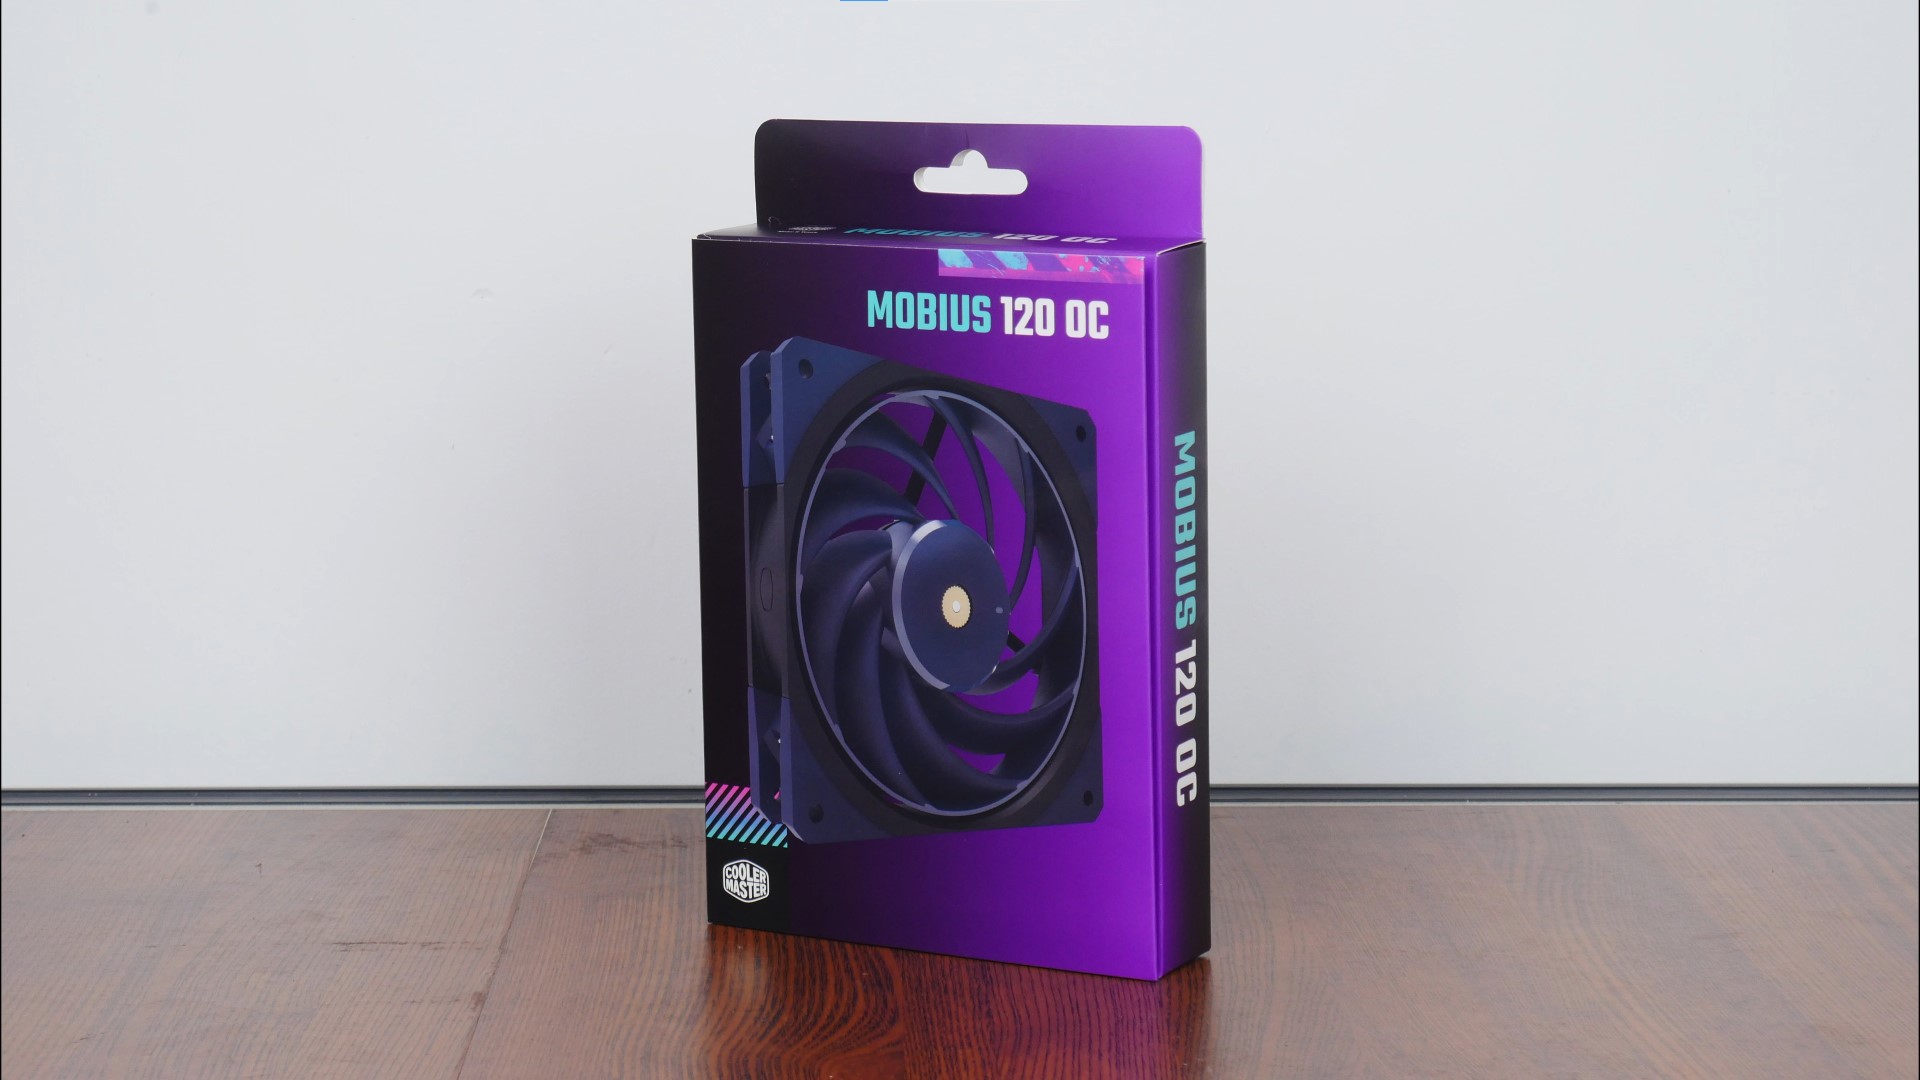 Cooler Master Mobius 120 OC Packaging (Front)